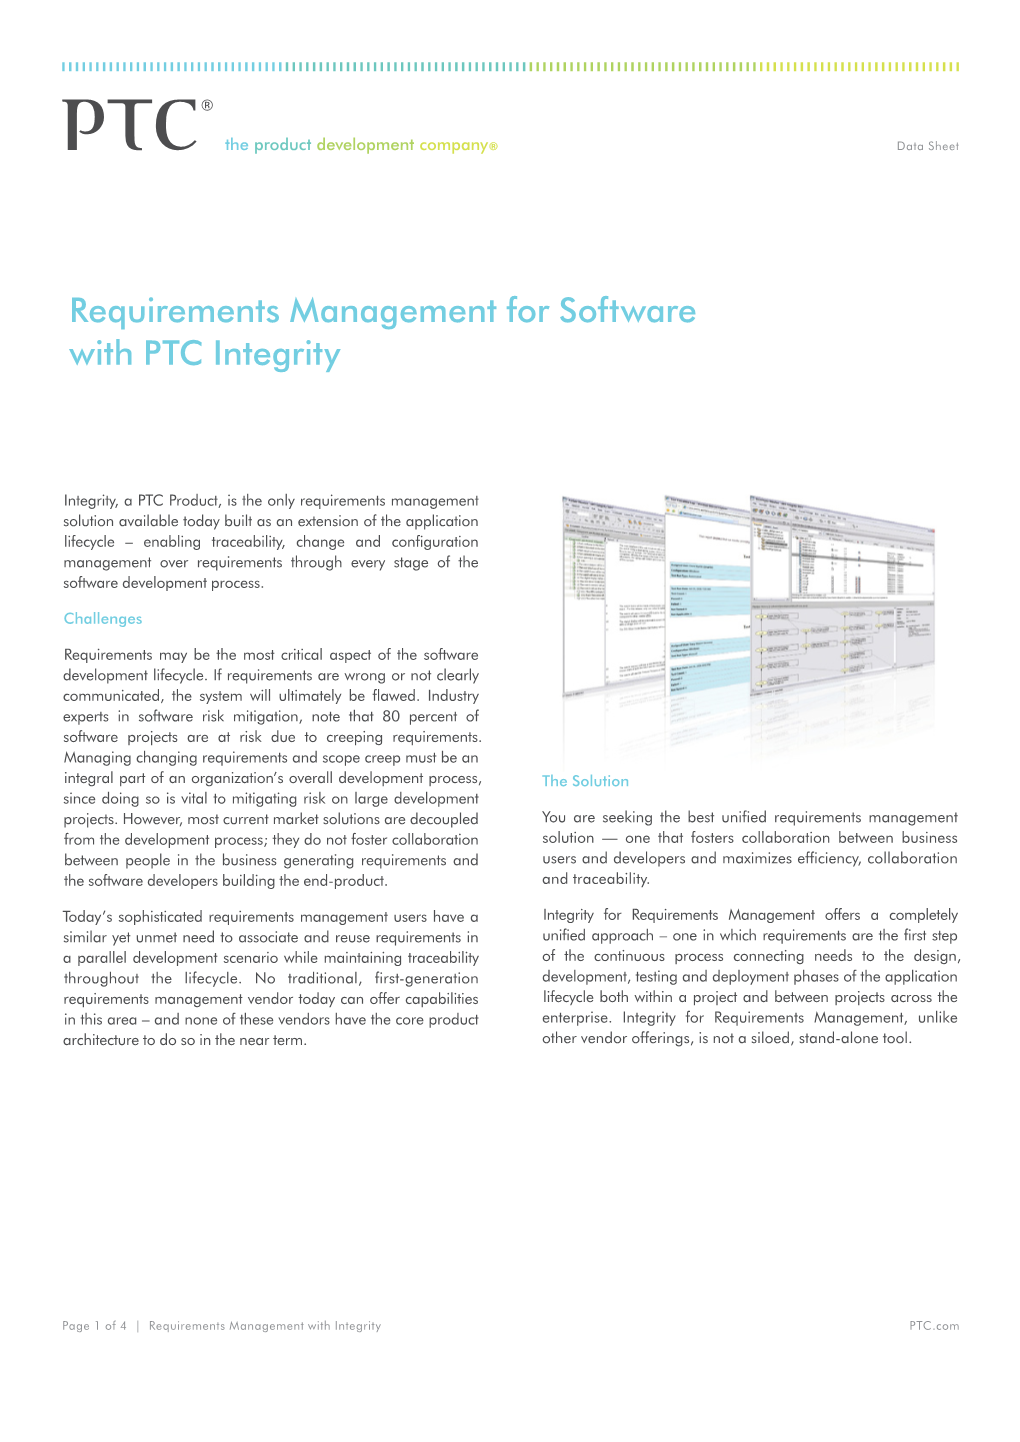 Requirements Management for Software with PTC Integrity